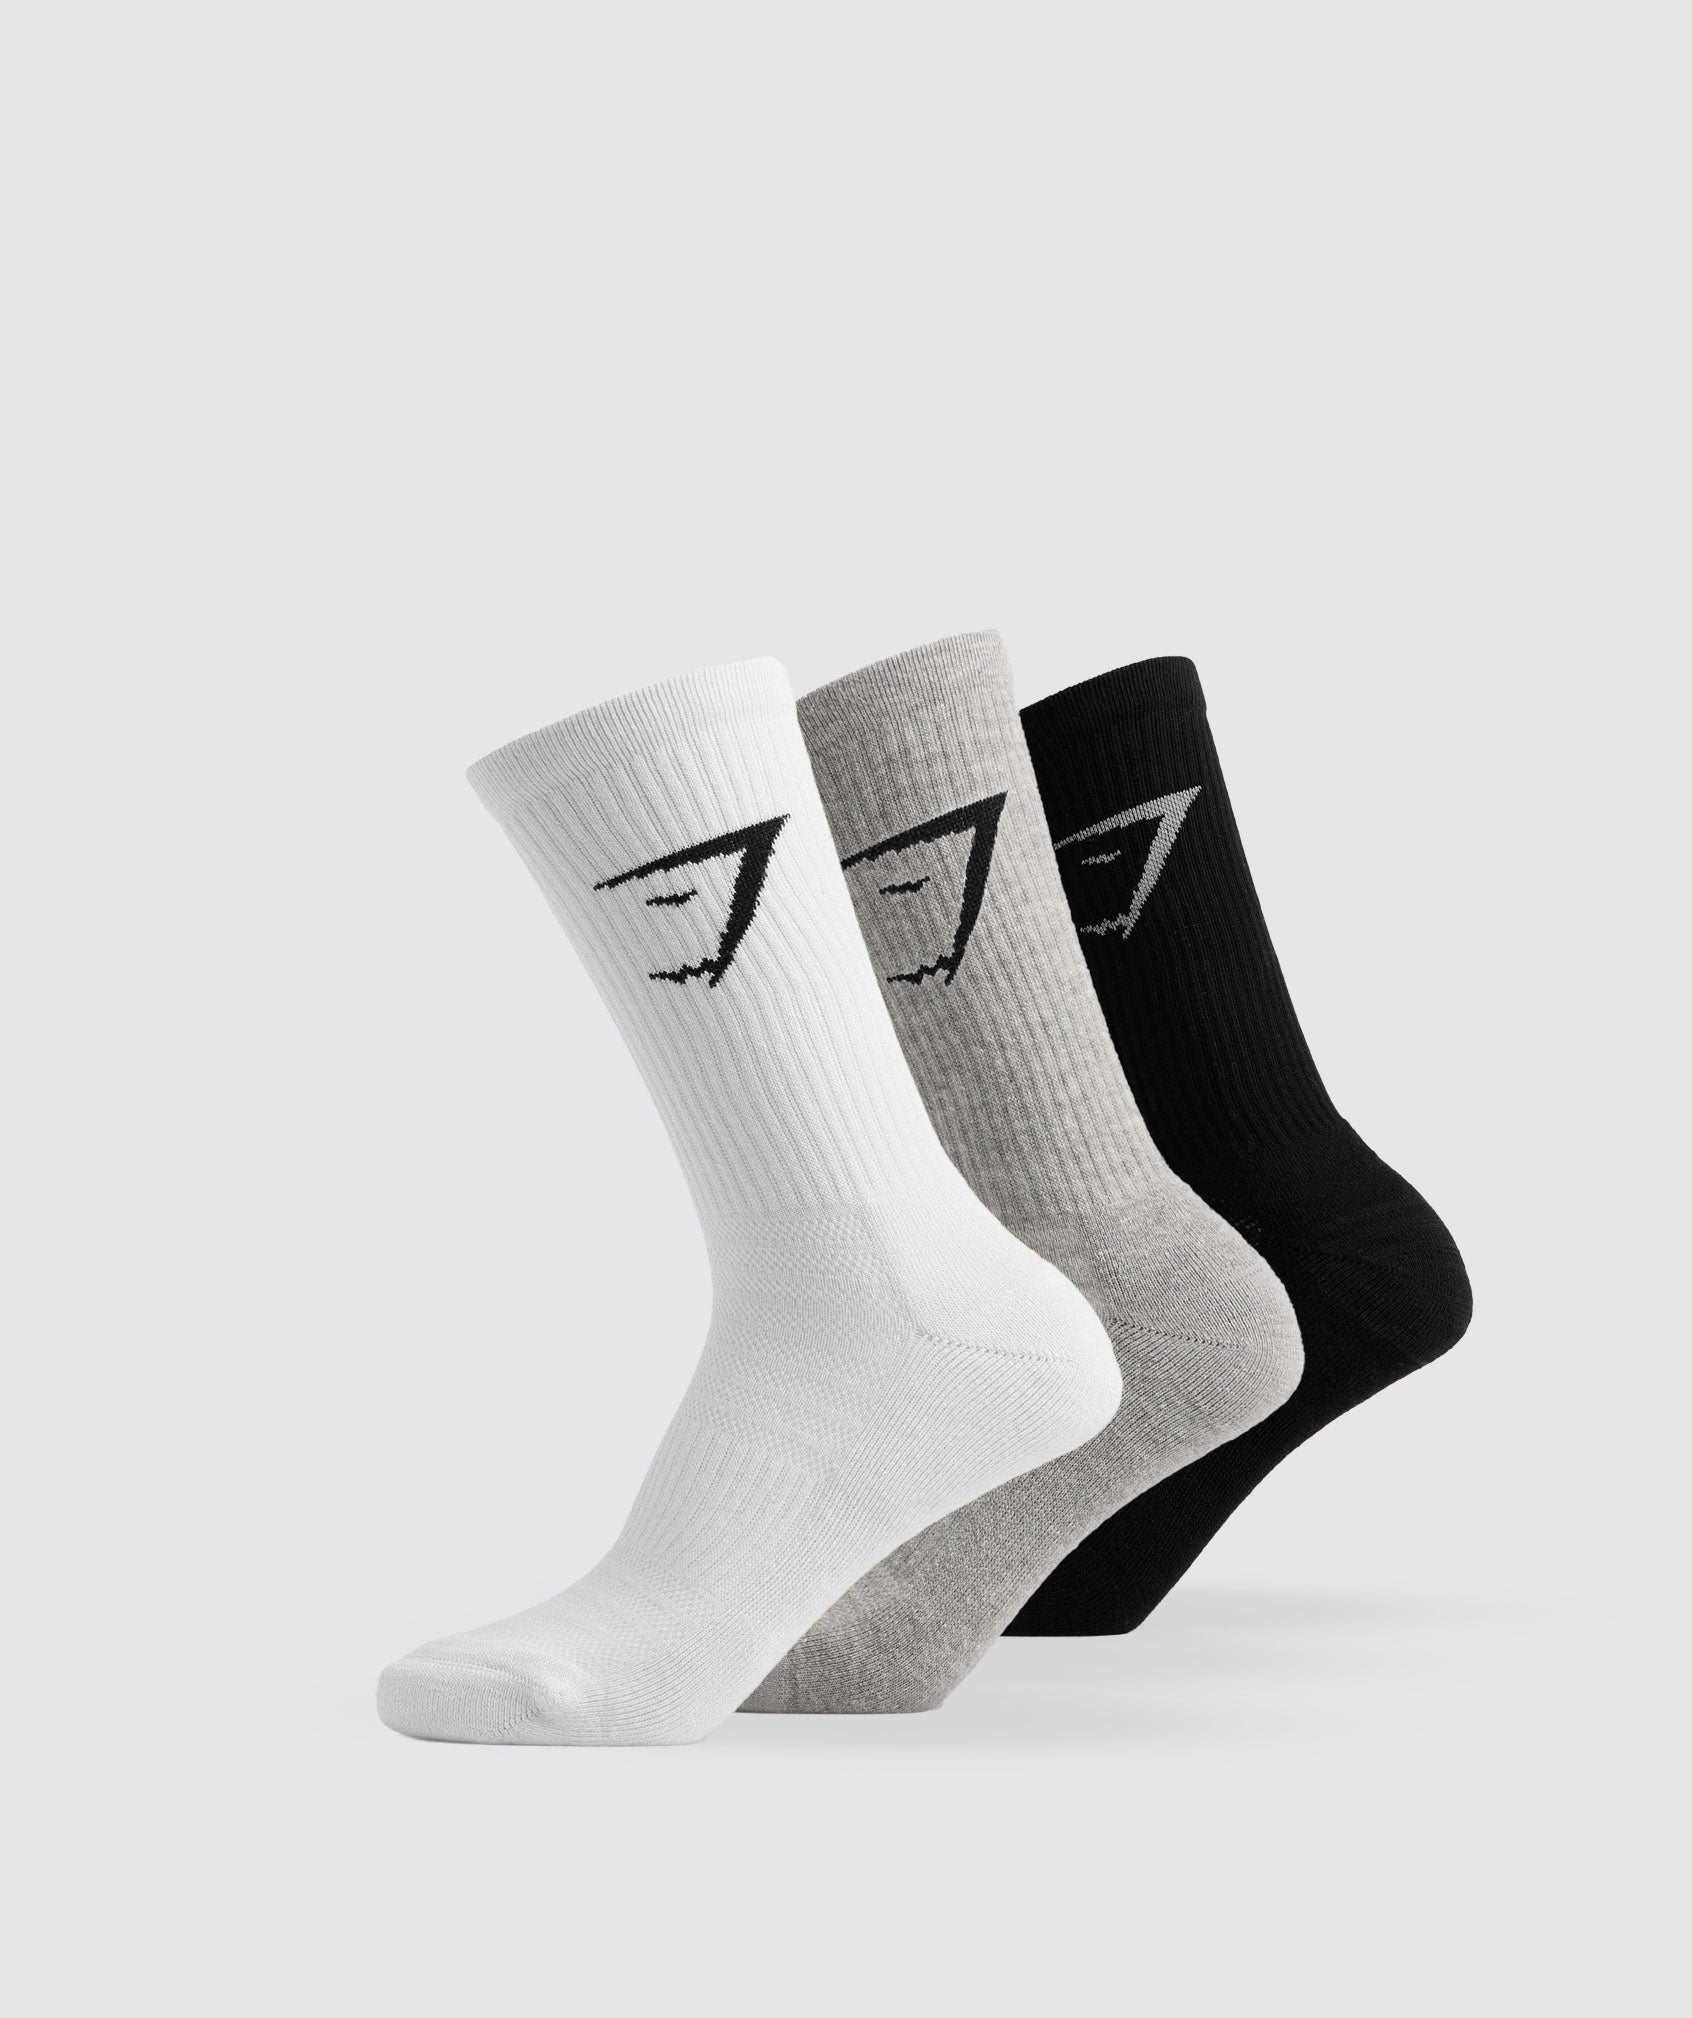 Crew Socks 3pk in {{variantColor} is out of stock